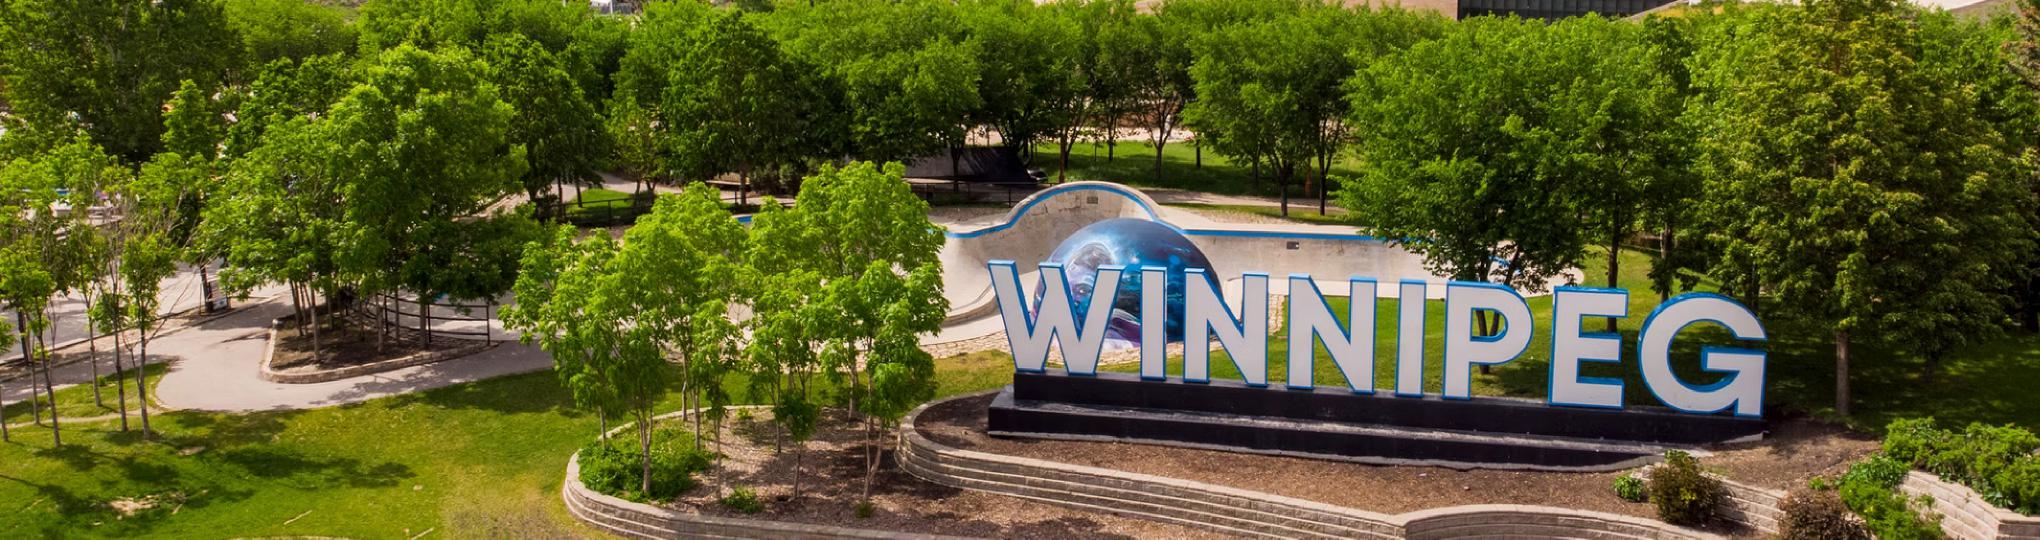 Large City of Winnipeg sign in uppercase white letters